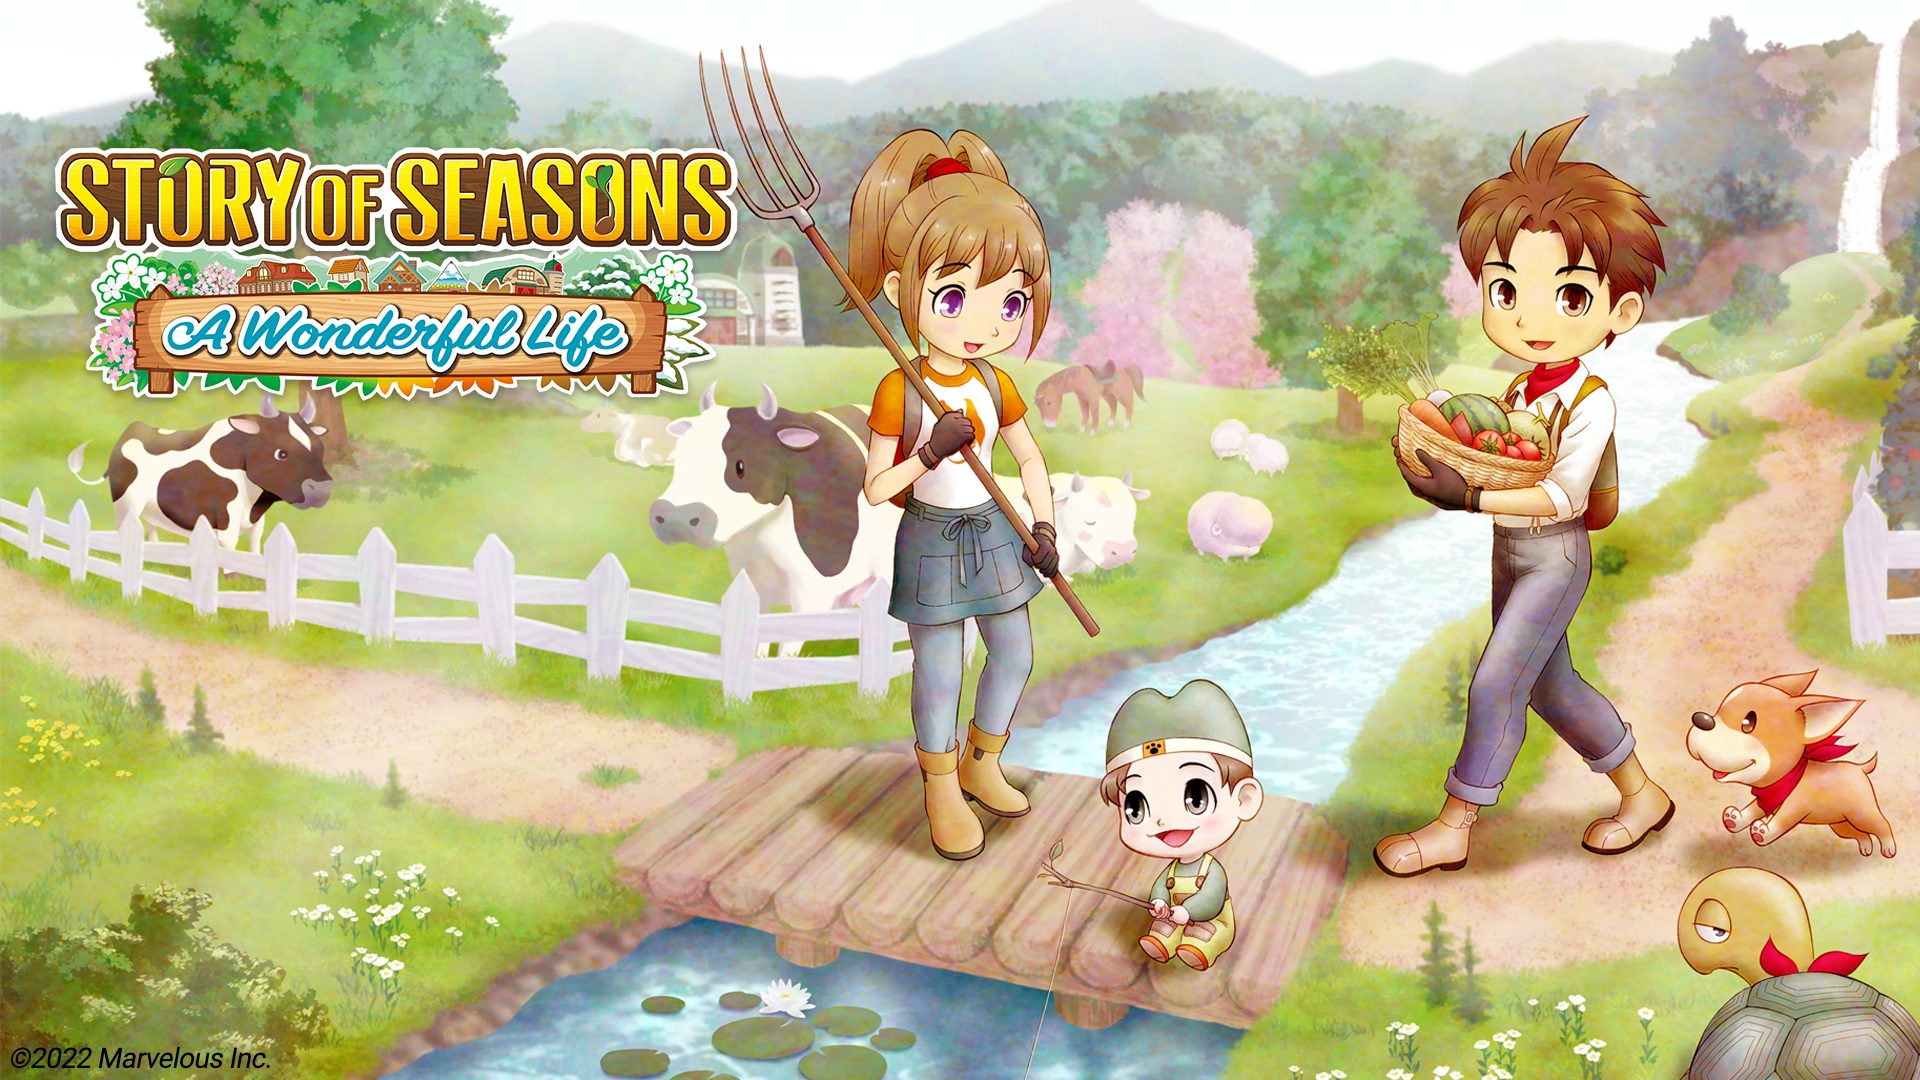 Story of Seasons: A Wonderful Life remakes the GameCube classic Harvest Moon